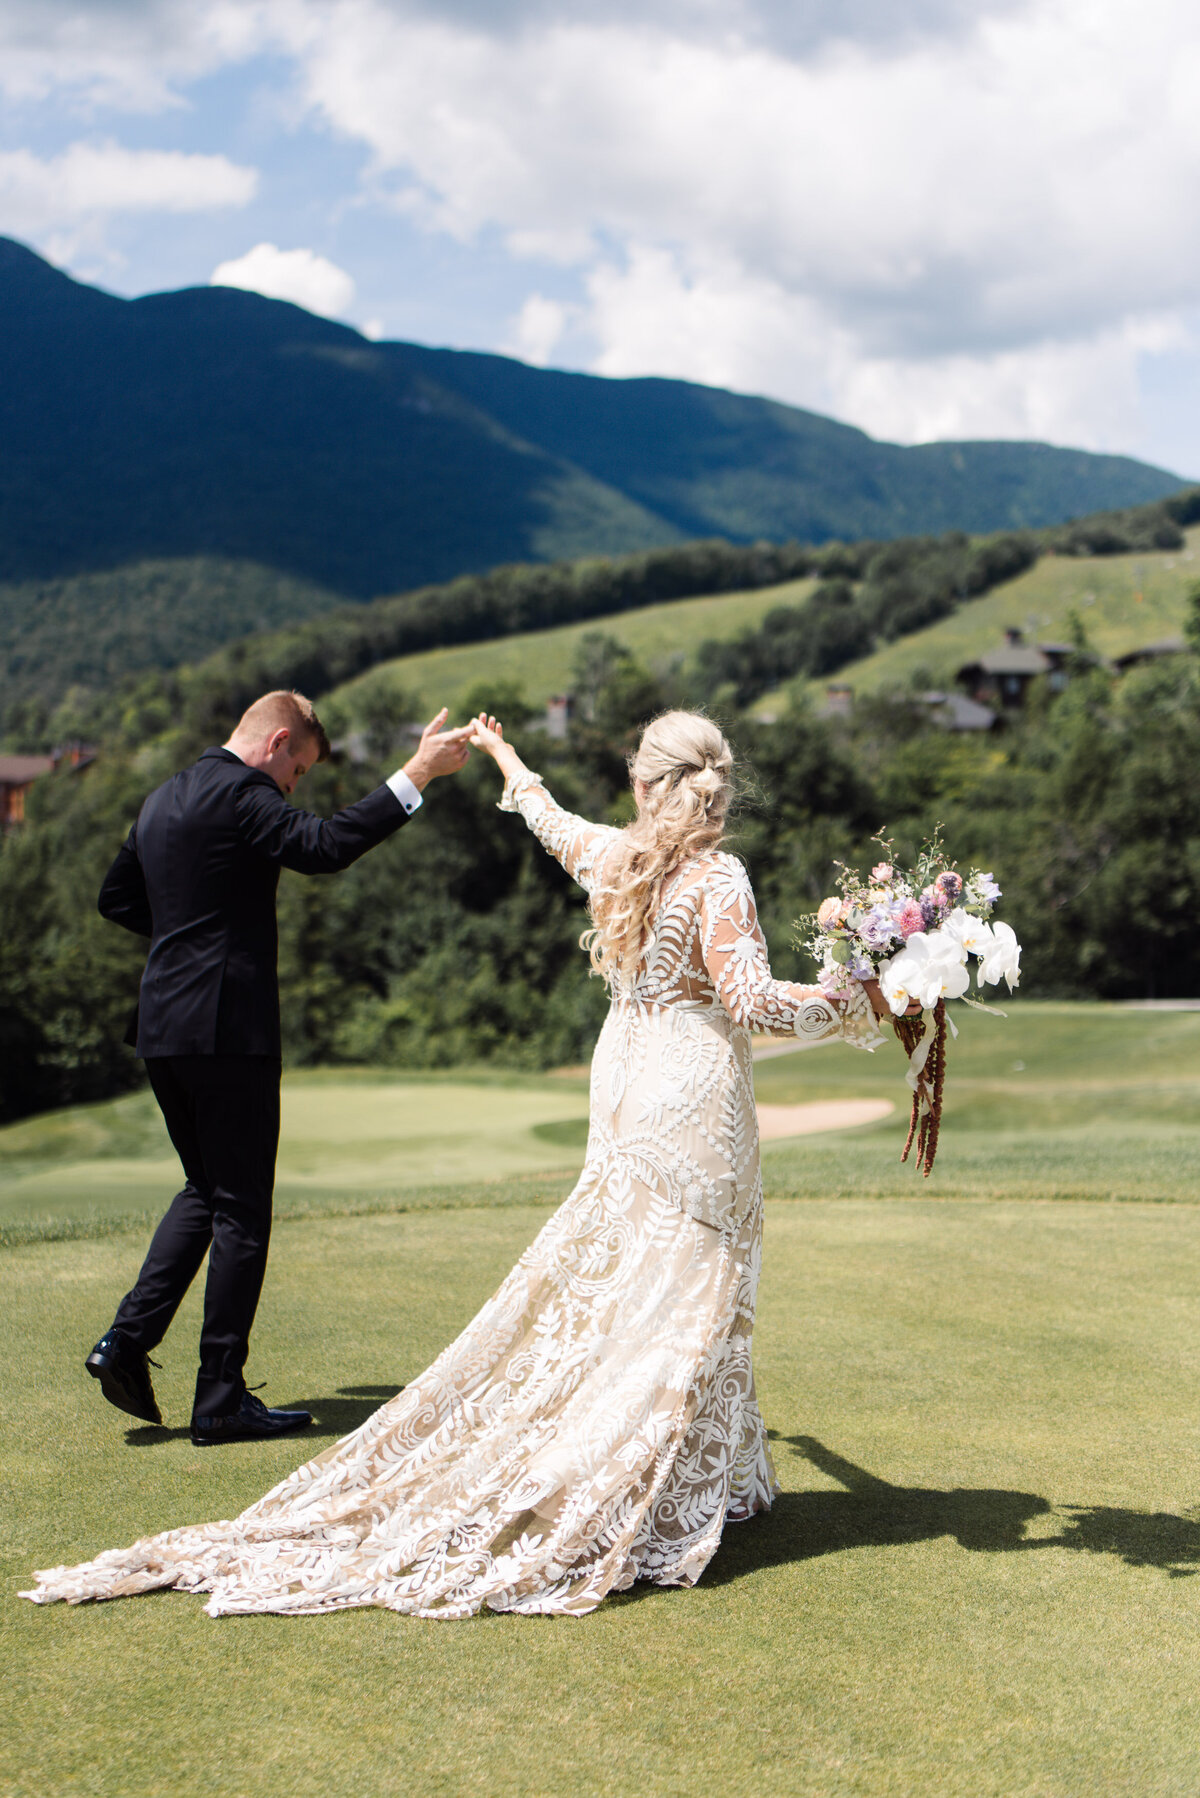 Groom leads bride by hand across golf course at spruce speak wedding